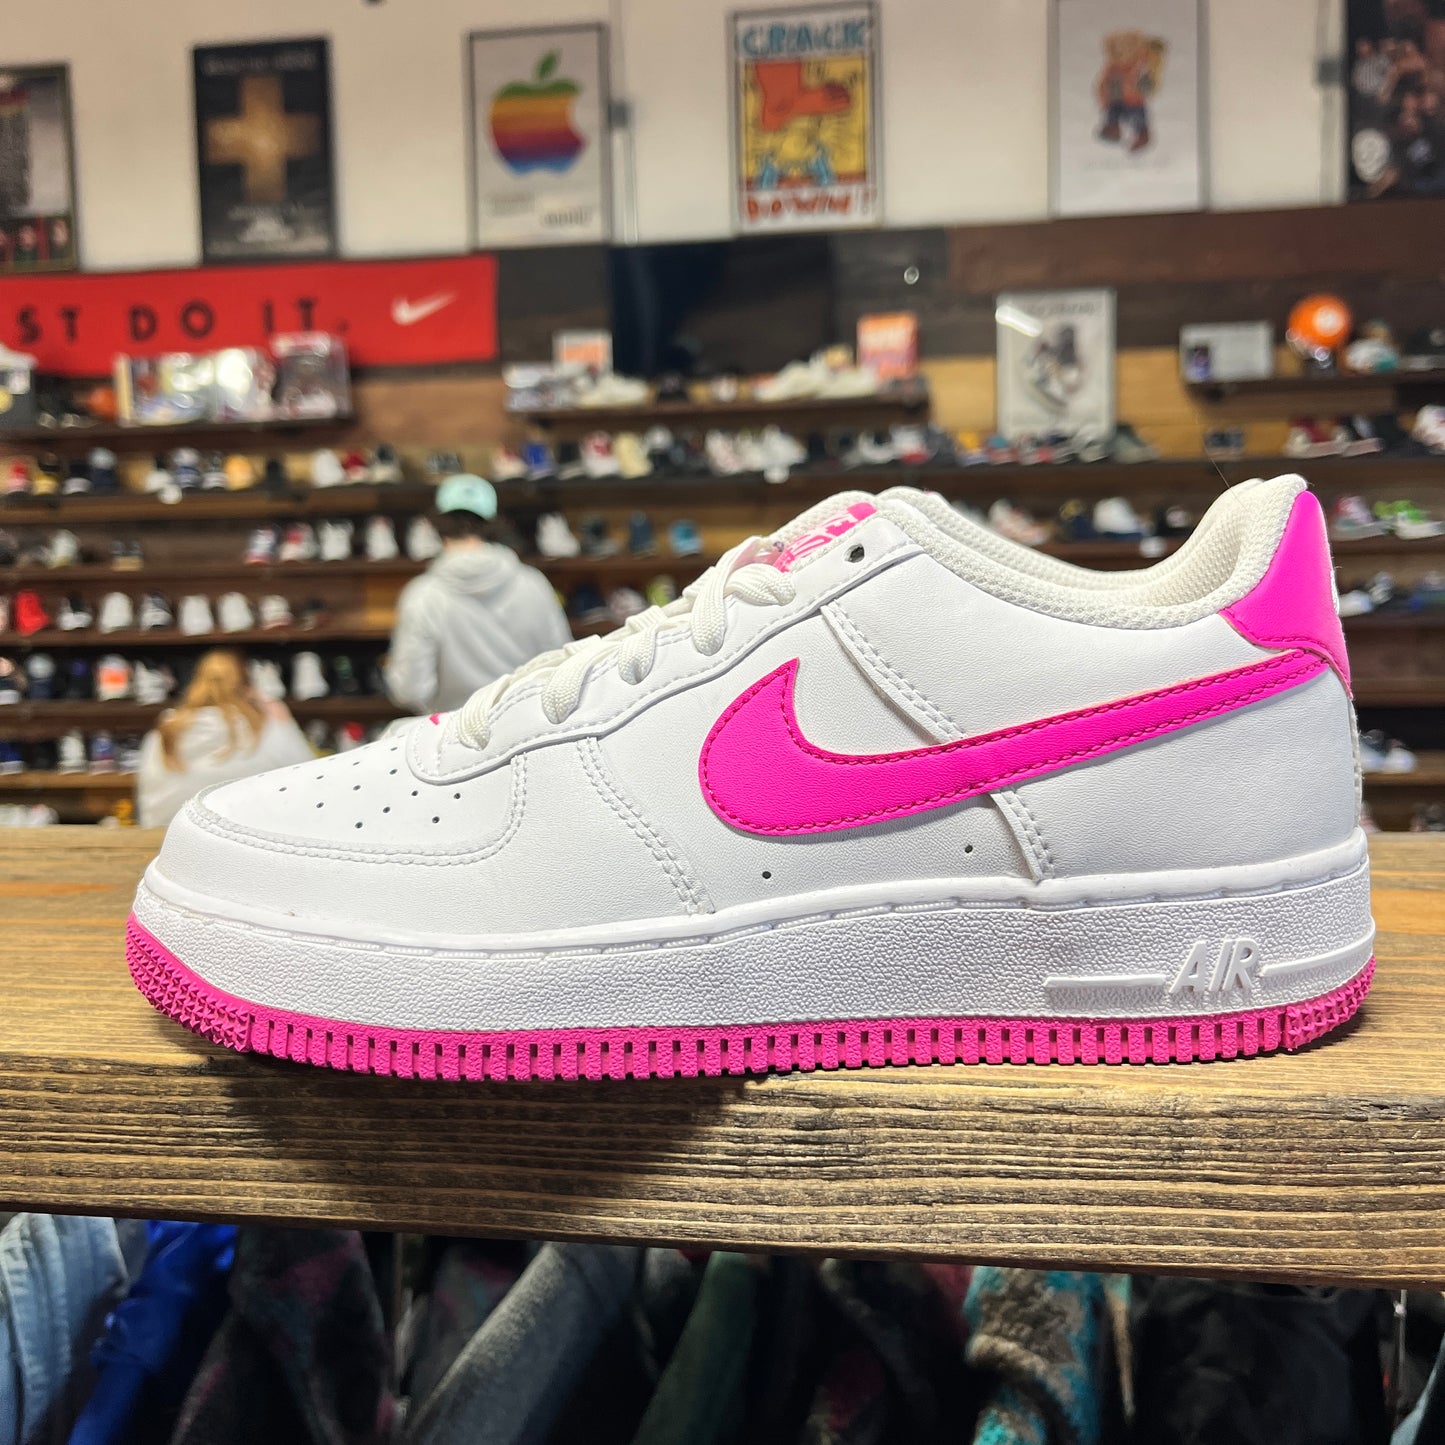 Nike Air Force 1 Low 'White Laser Fuchsia' Size 4.5Y